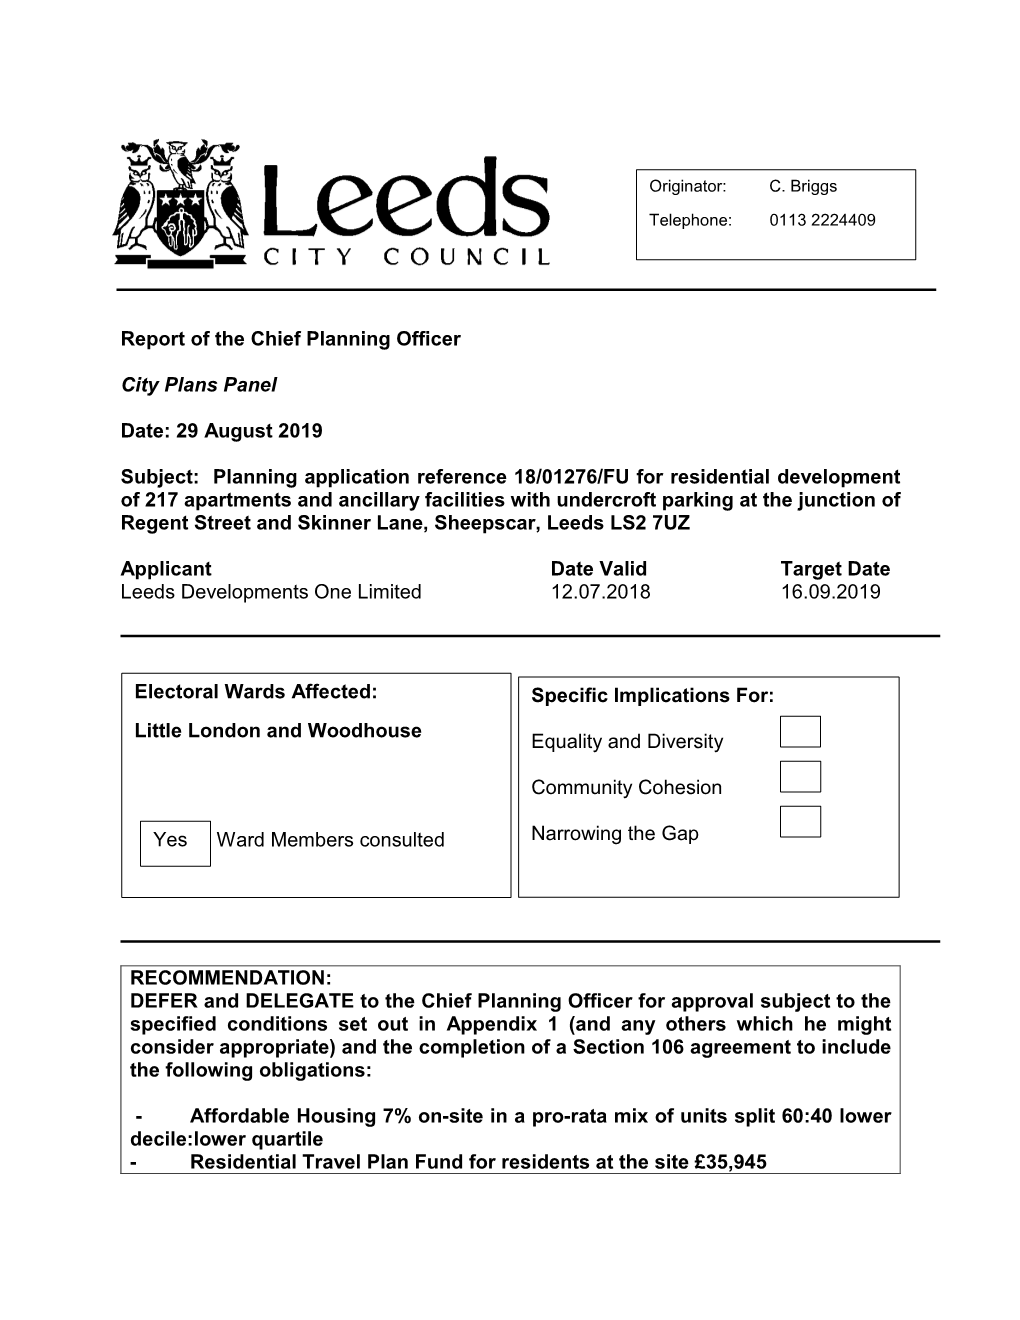 29 August 2019 Subject: Planning Application Reference 18/01276/FU F